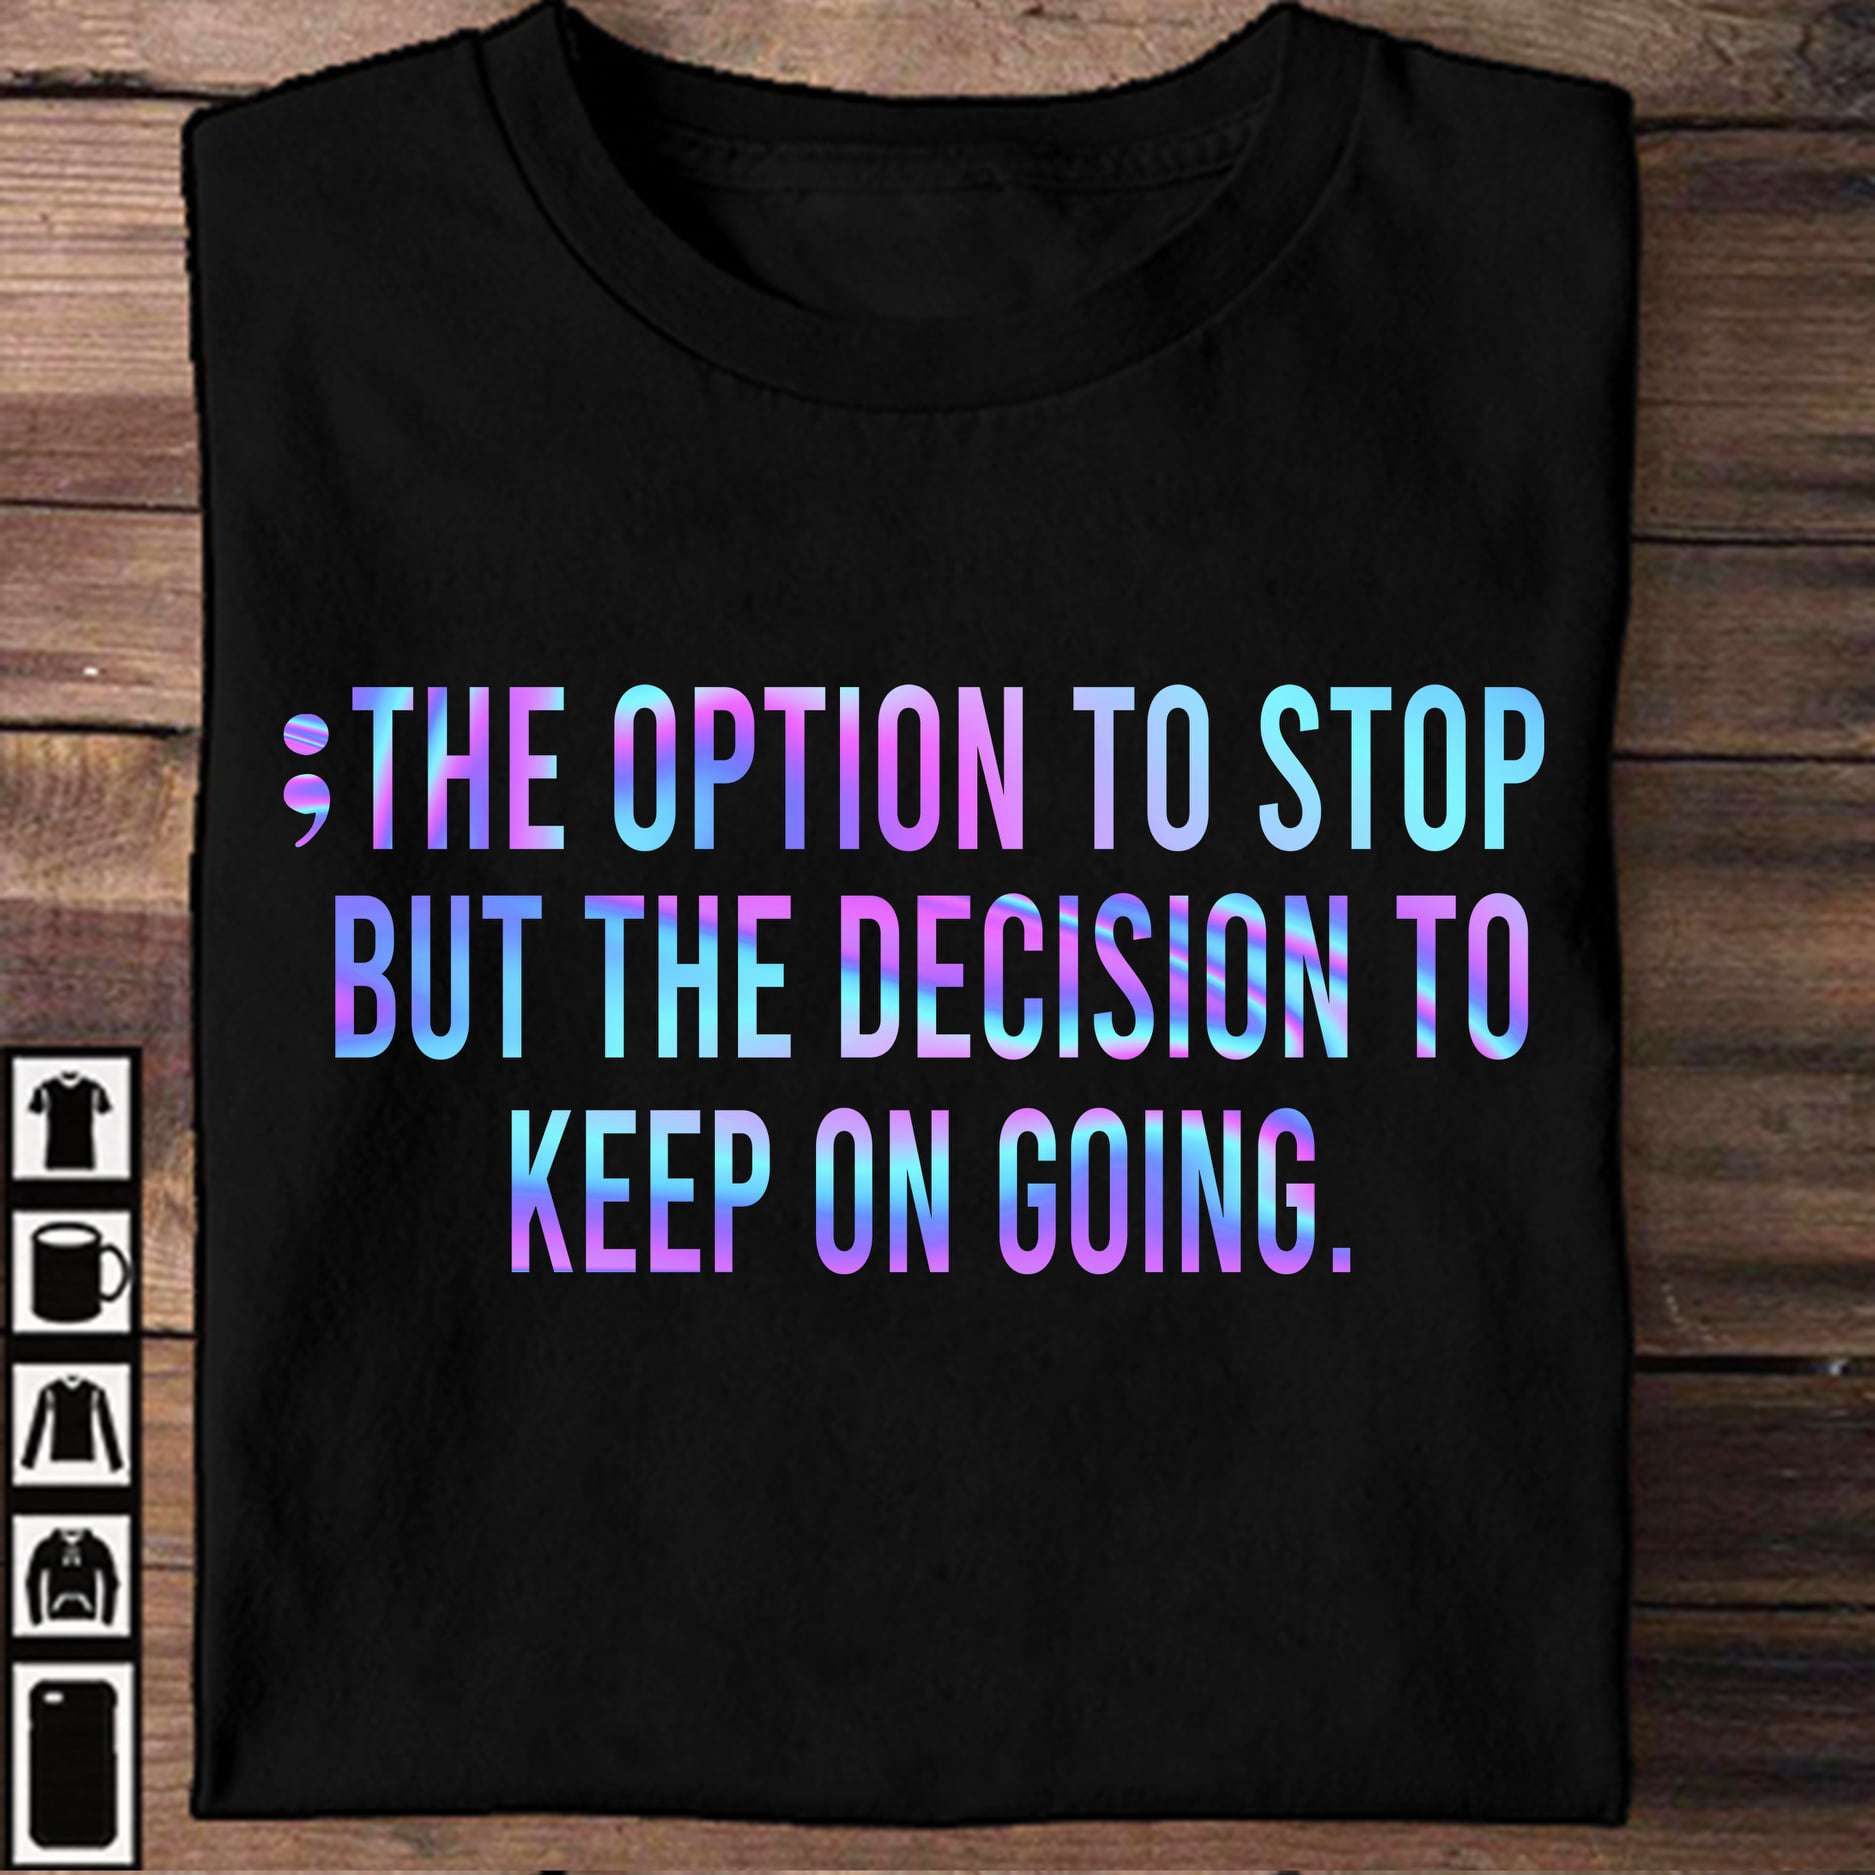 The option to stop but the decision to keep on going - Never give up